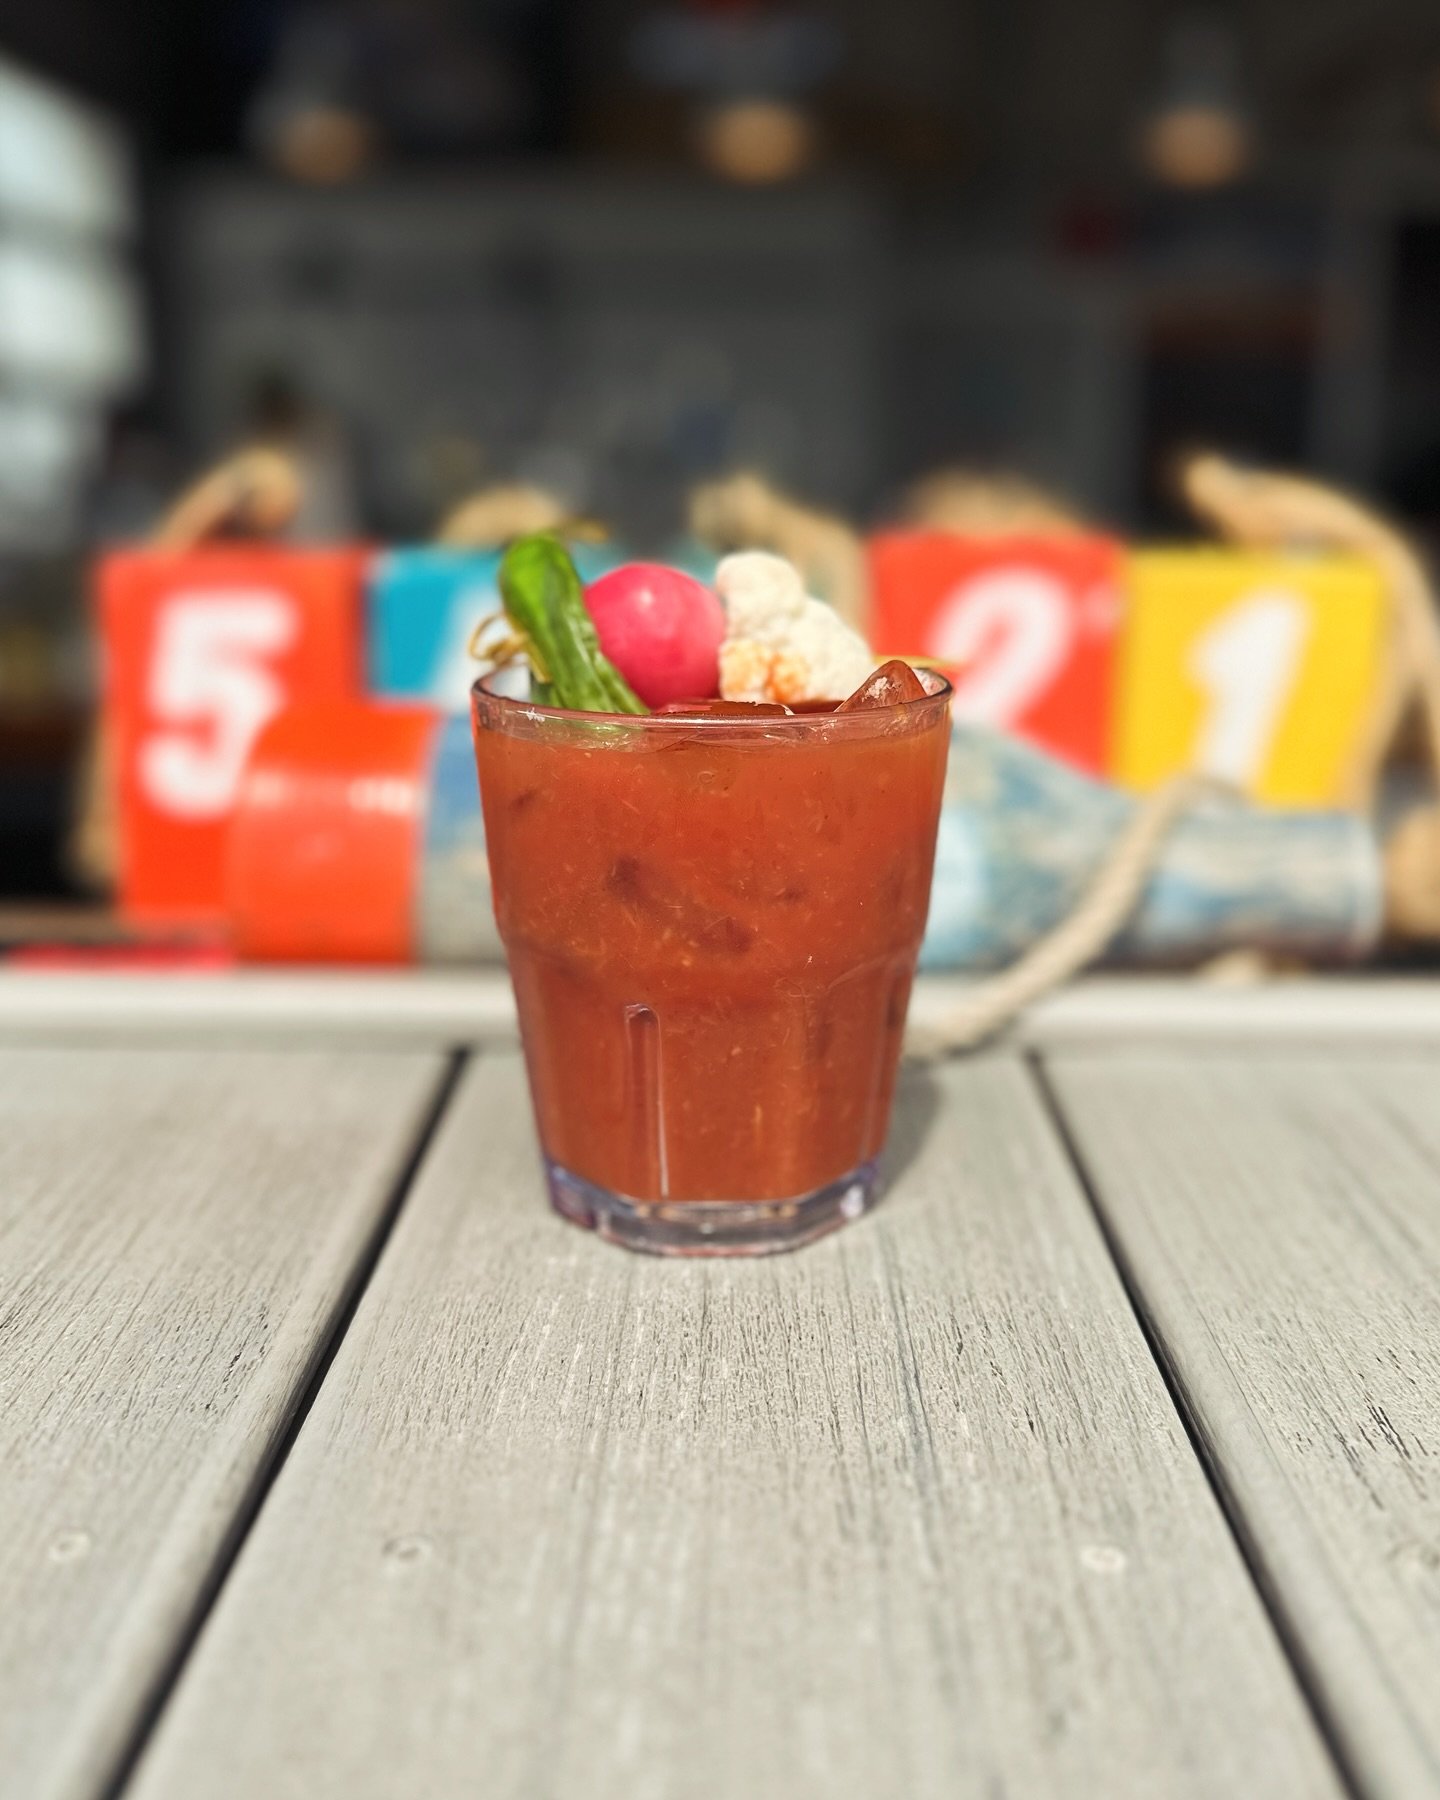 Bloody Mary or Bloody Maria? Ours are served with vegetable infused vodka or dill infused tequila, and garnished with house pickled veggies! Jazz brunch goes until 3pm, with the regular menu until 9pm! 
&bull;
&bull;
&bull;
#sunsetclub #plumisland #n